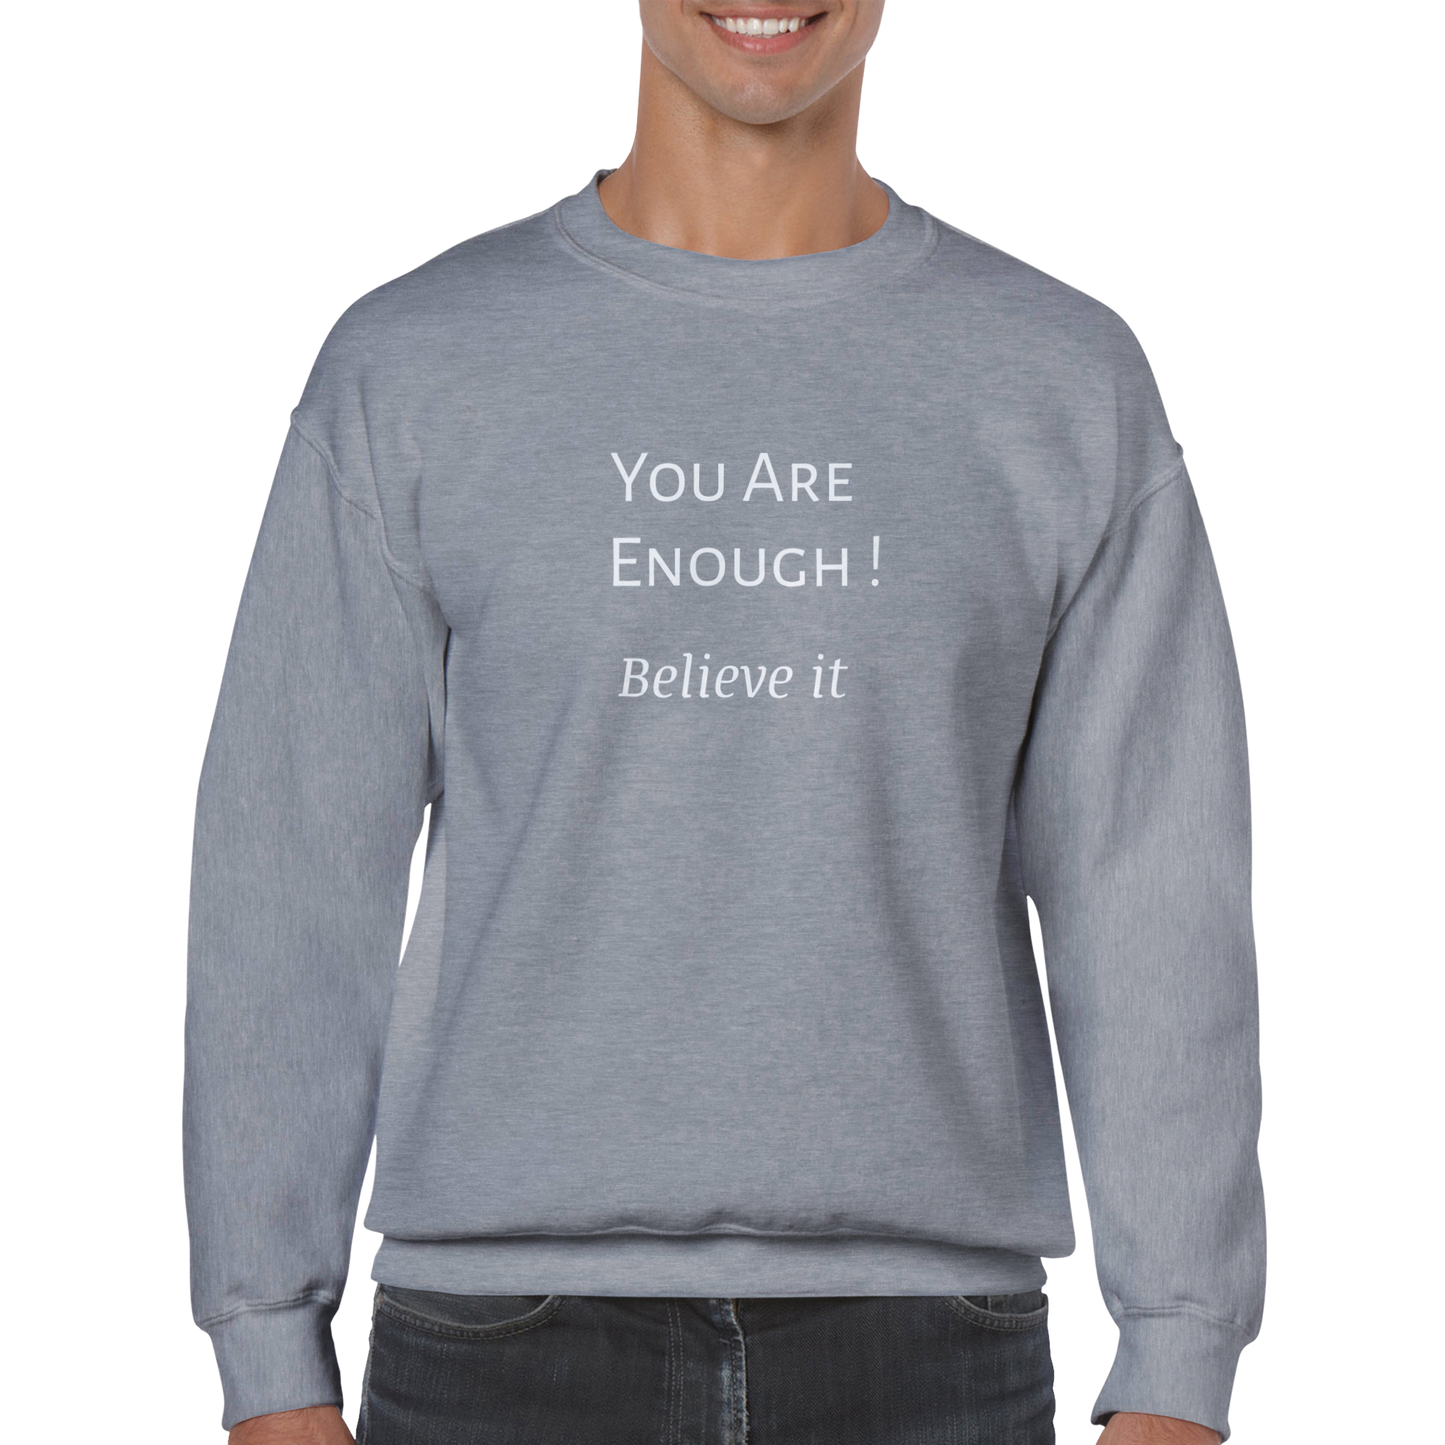 You are Enough! Classic Unisex Crewneck Sweatshirt. Wear it and share it forward.